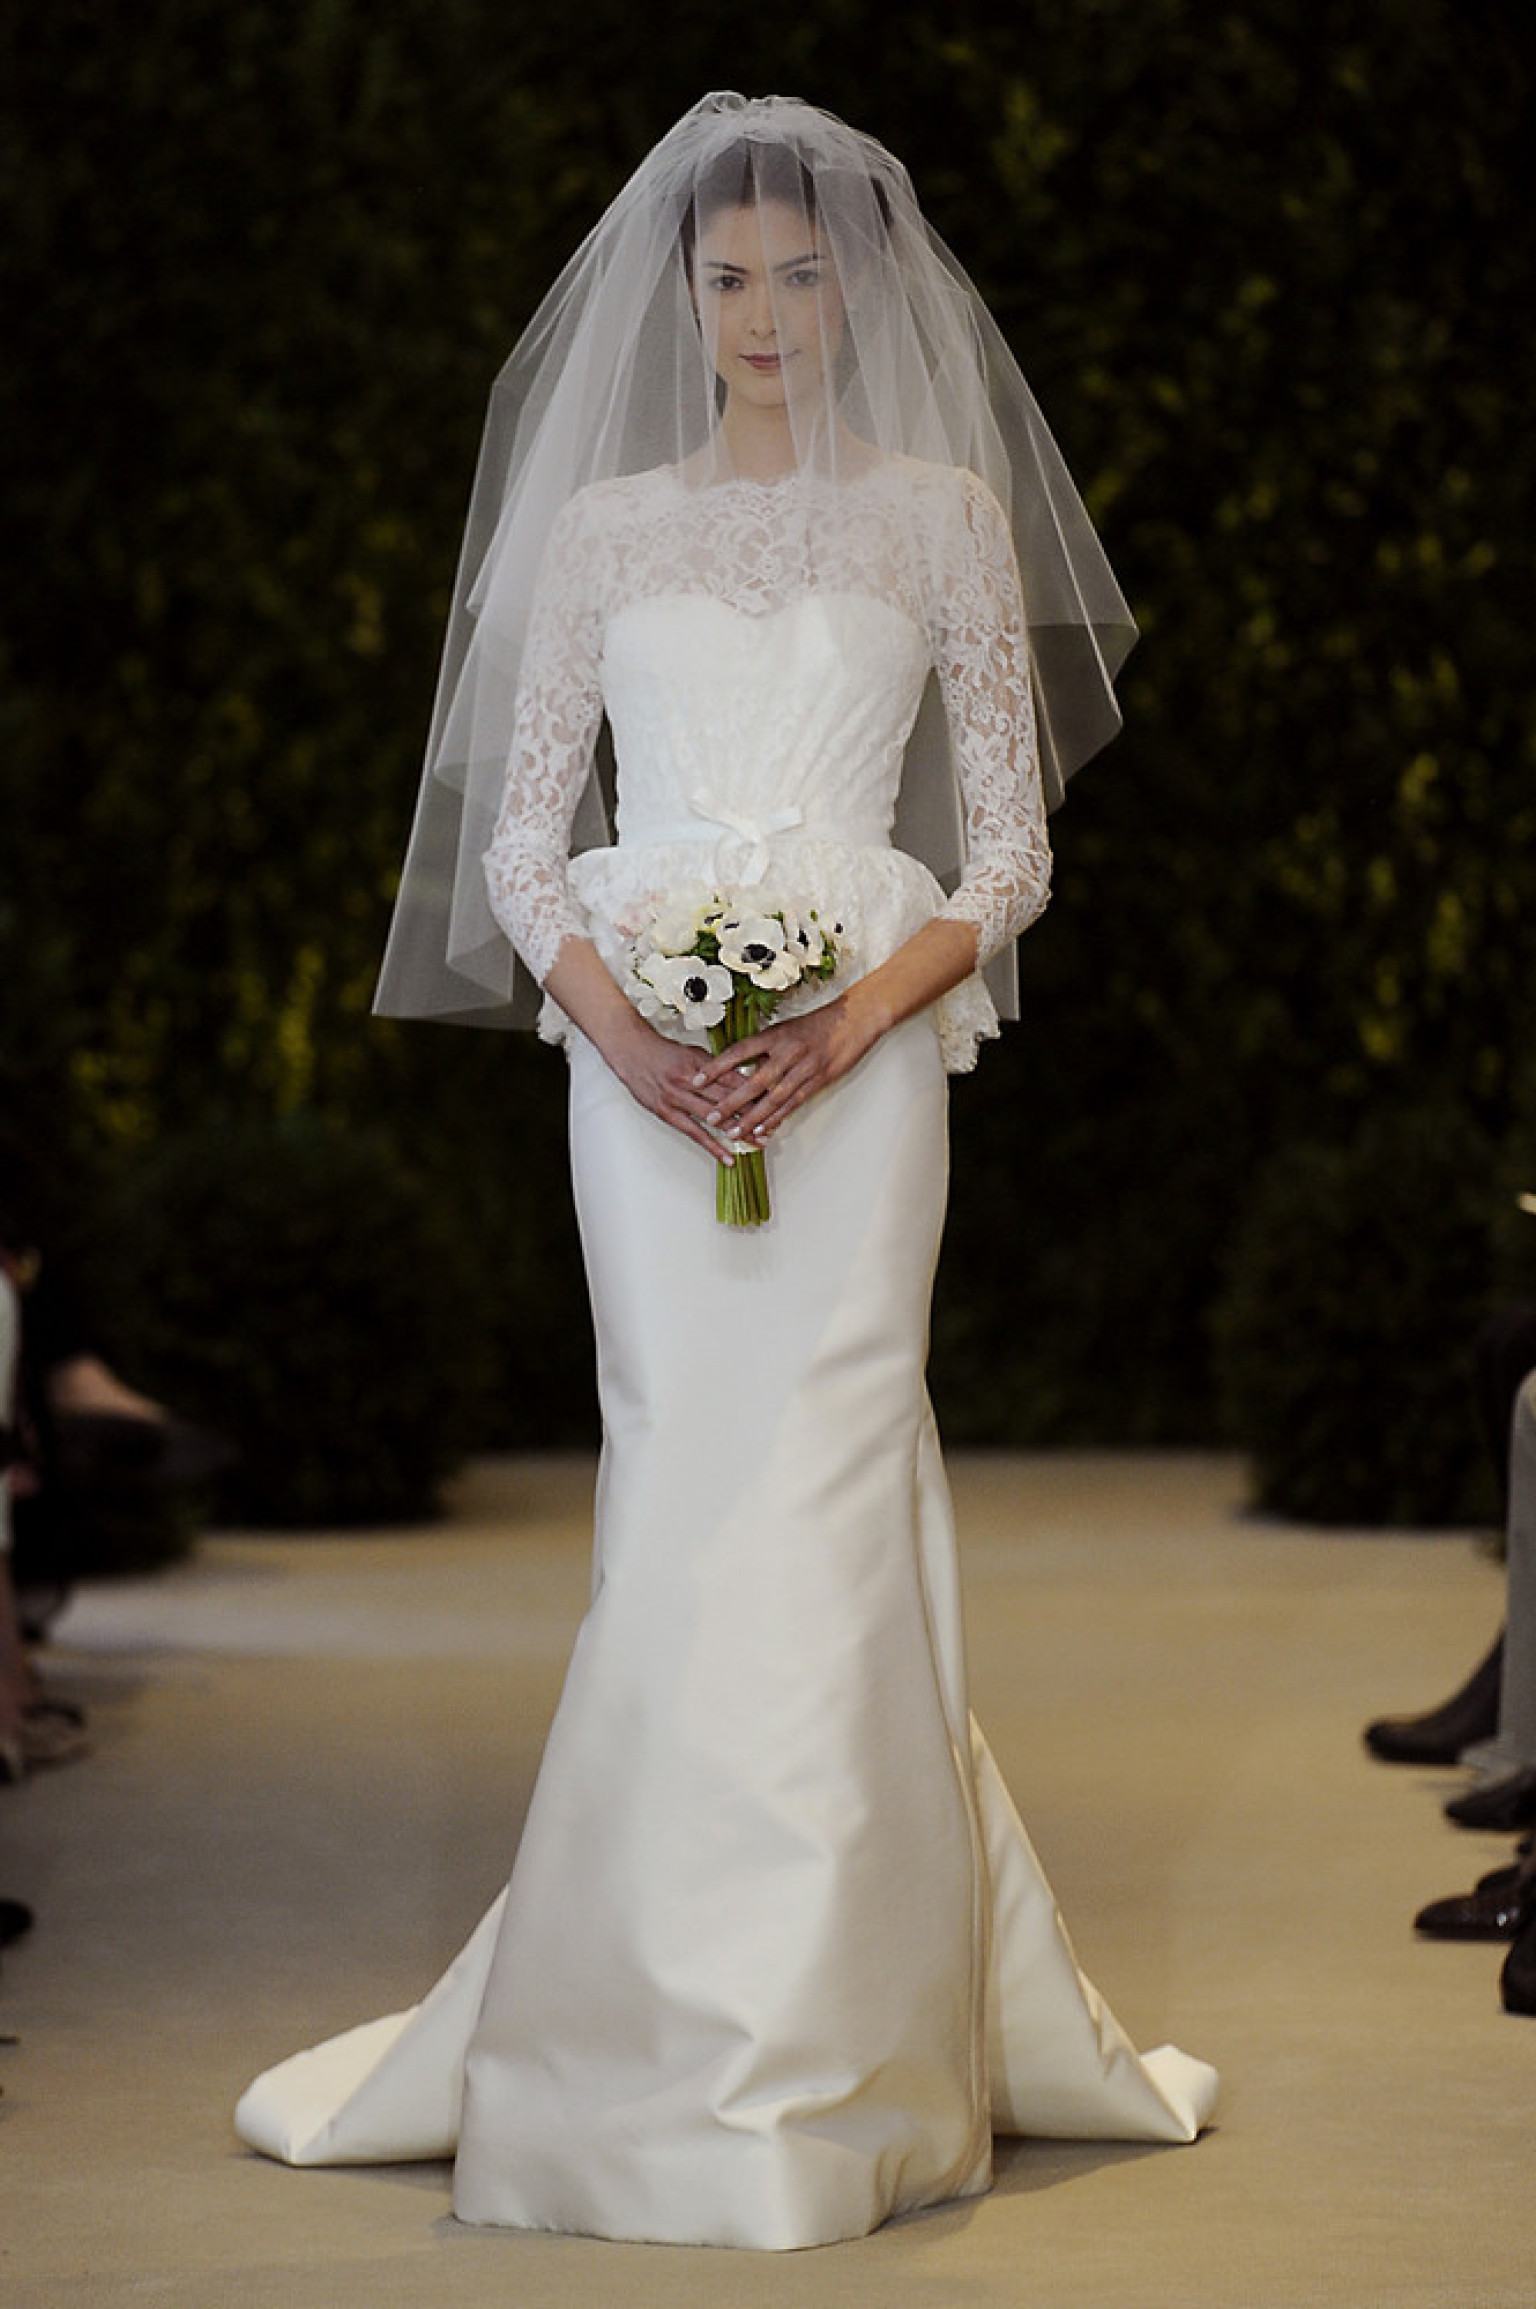 Fall Wedding Dresses Our Picks For The Best Autumn Gowns (PHOTOS